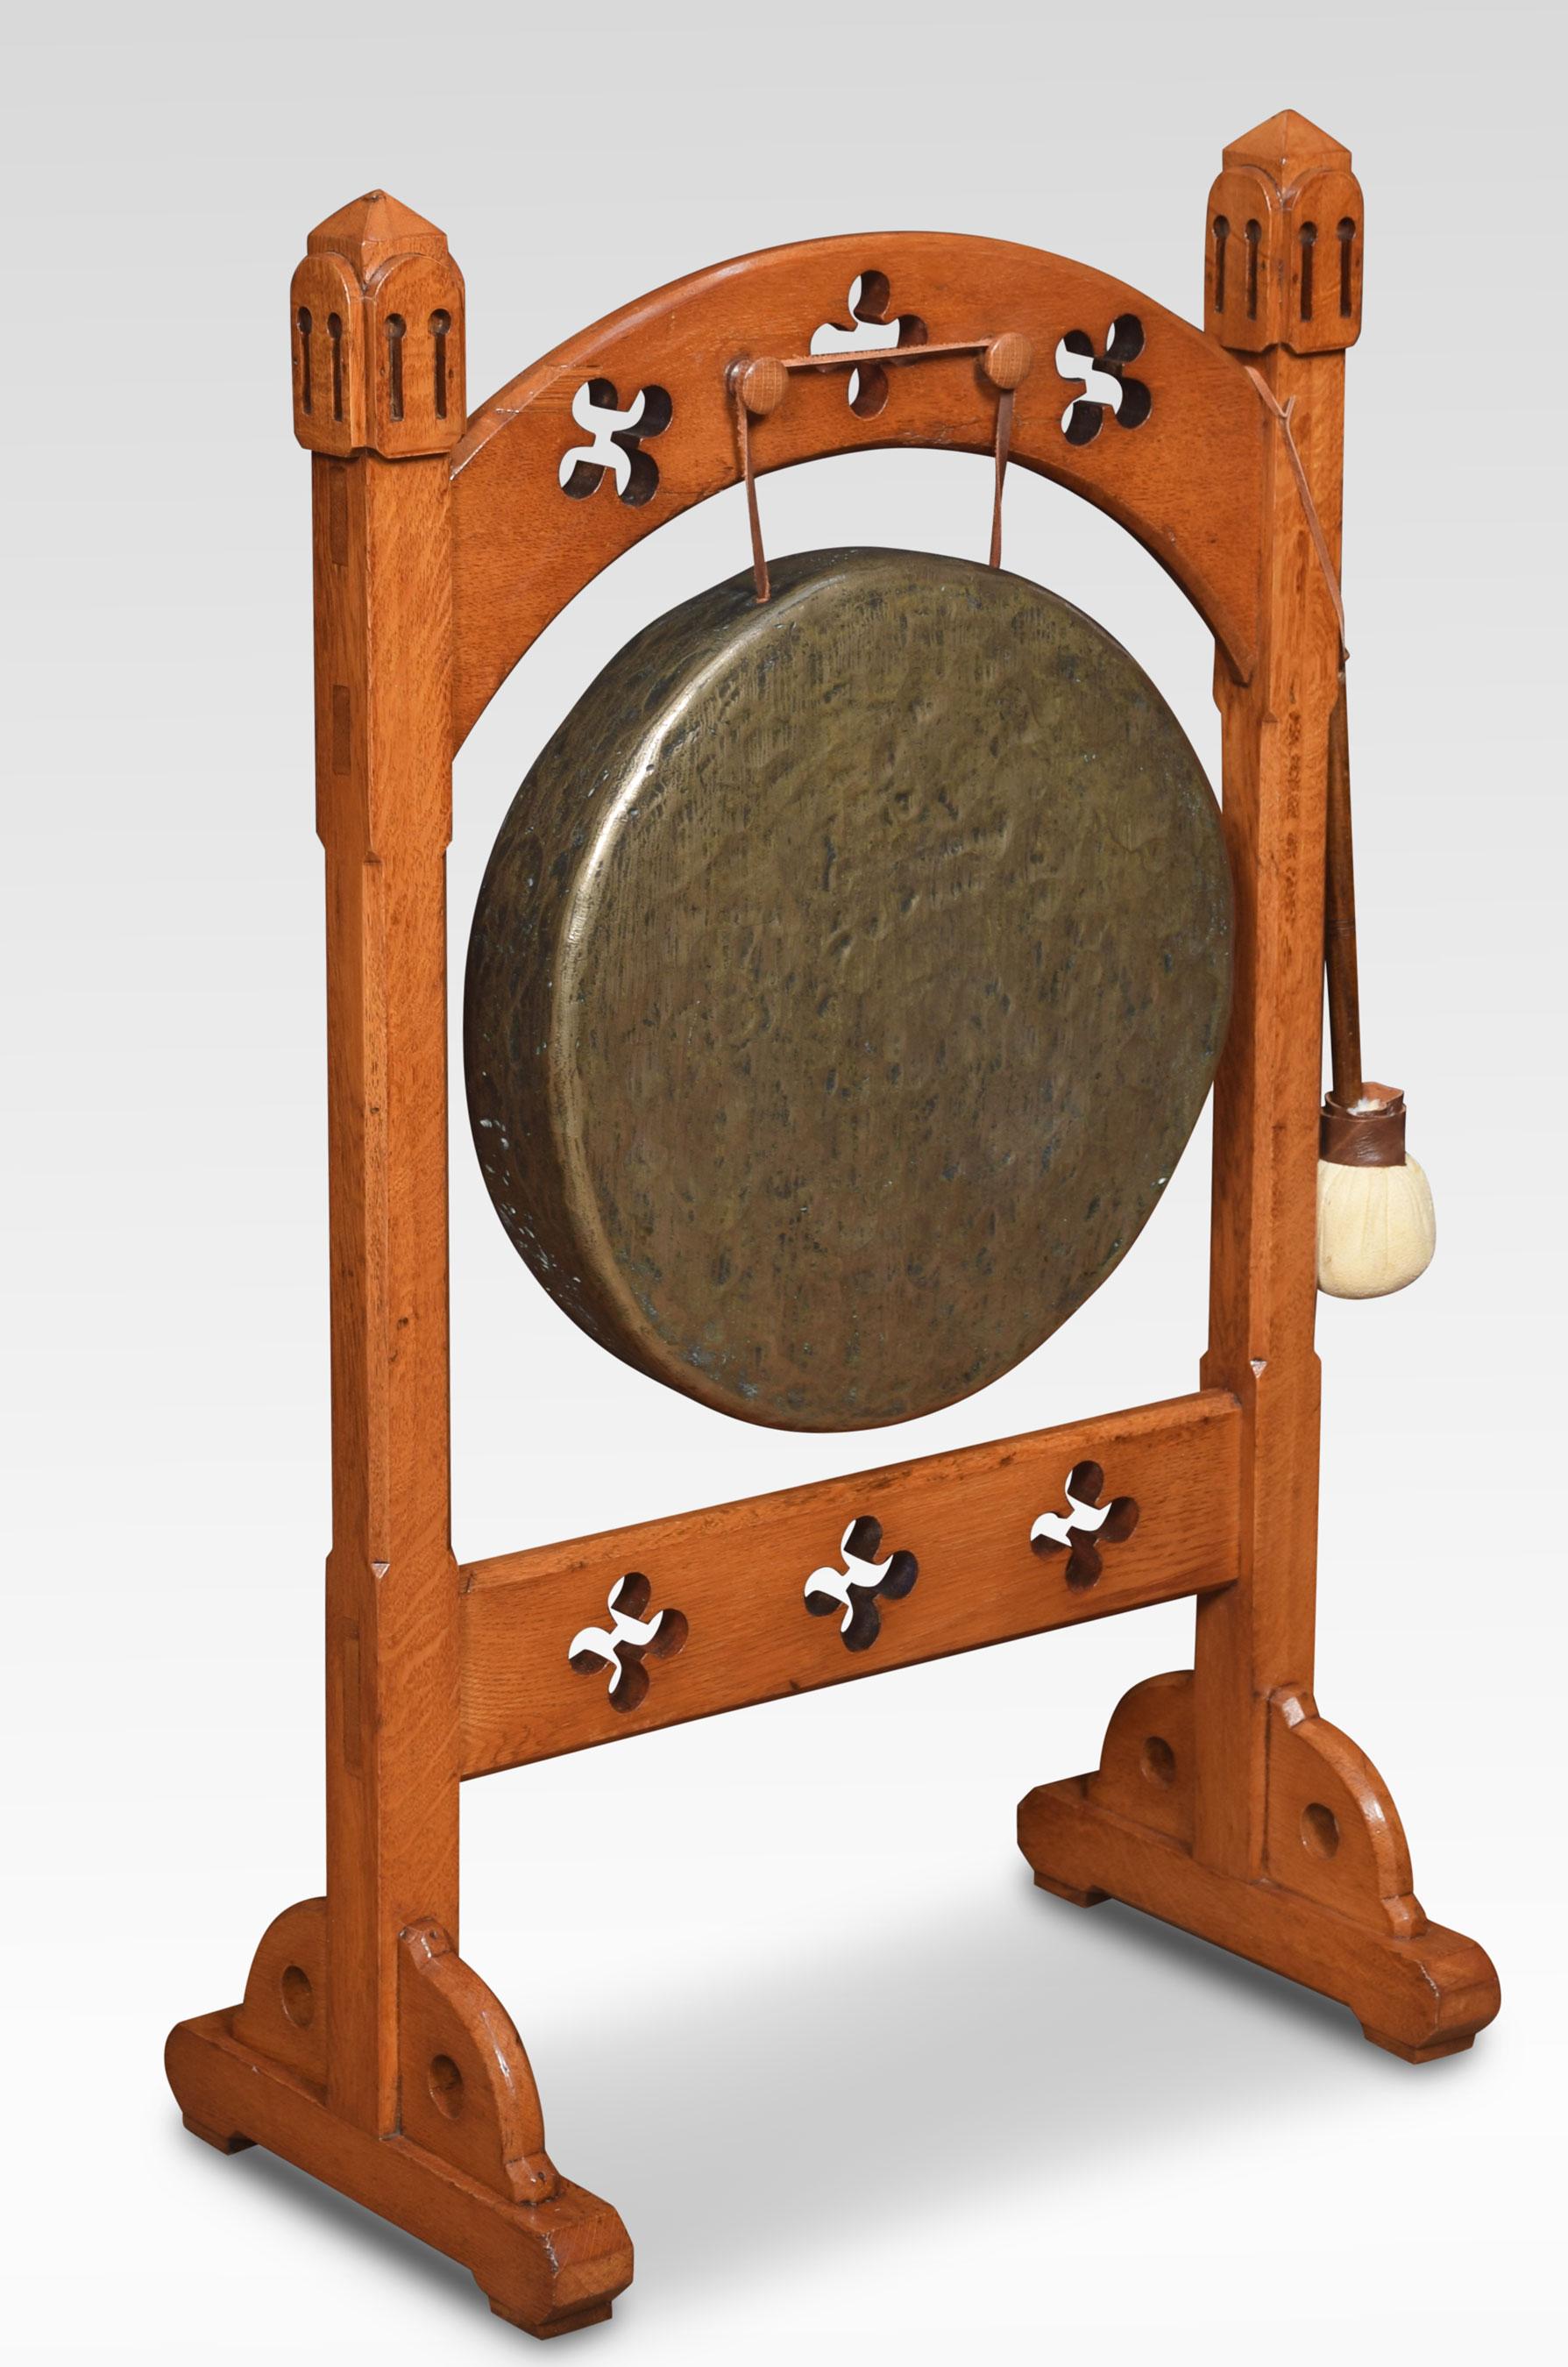 19th century gothic dinner gong the oak frame carved with Gothic trefoil motifs supporting the circular brass gong. Together with beater.
Dimensions:
Height 37.5 inches
Width 23.5 inches
Depth 13 inches.